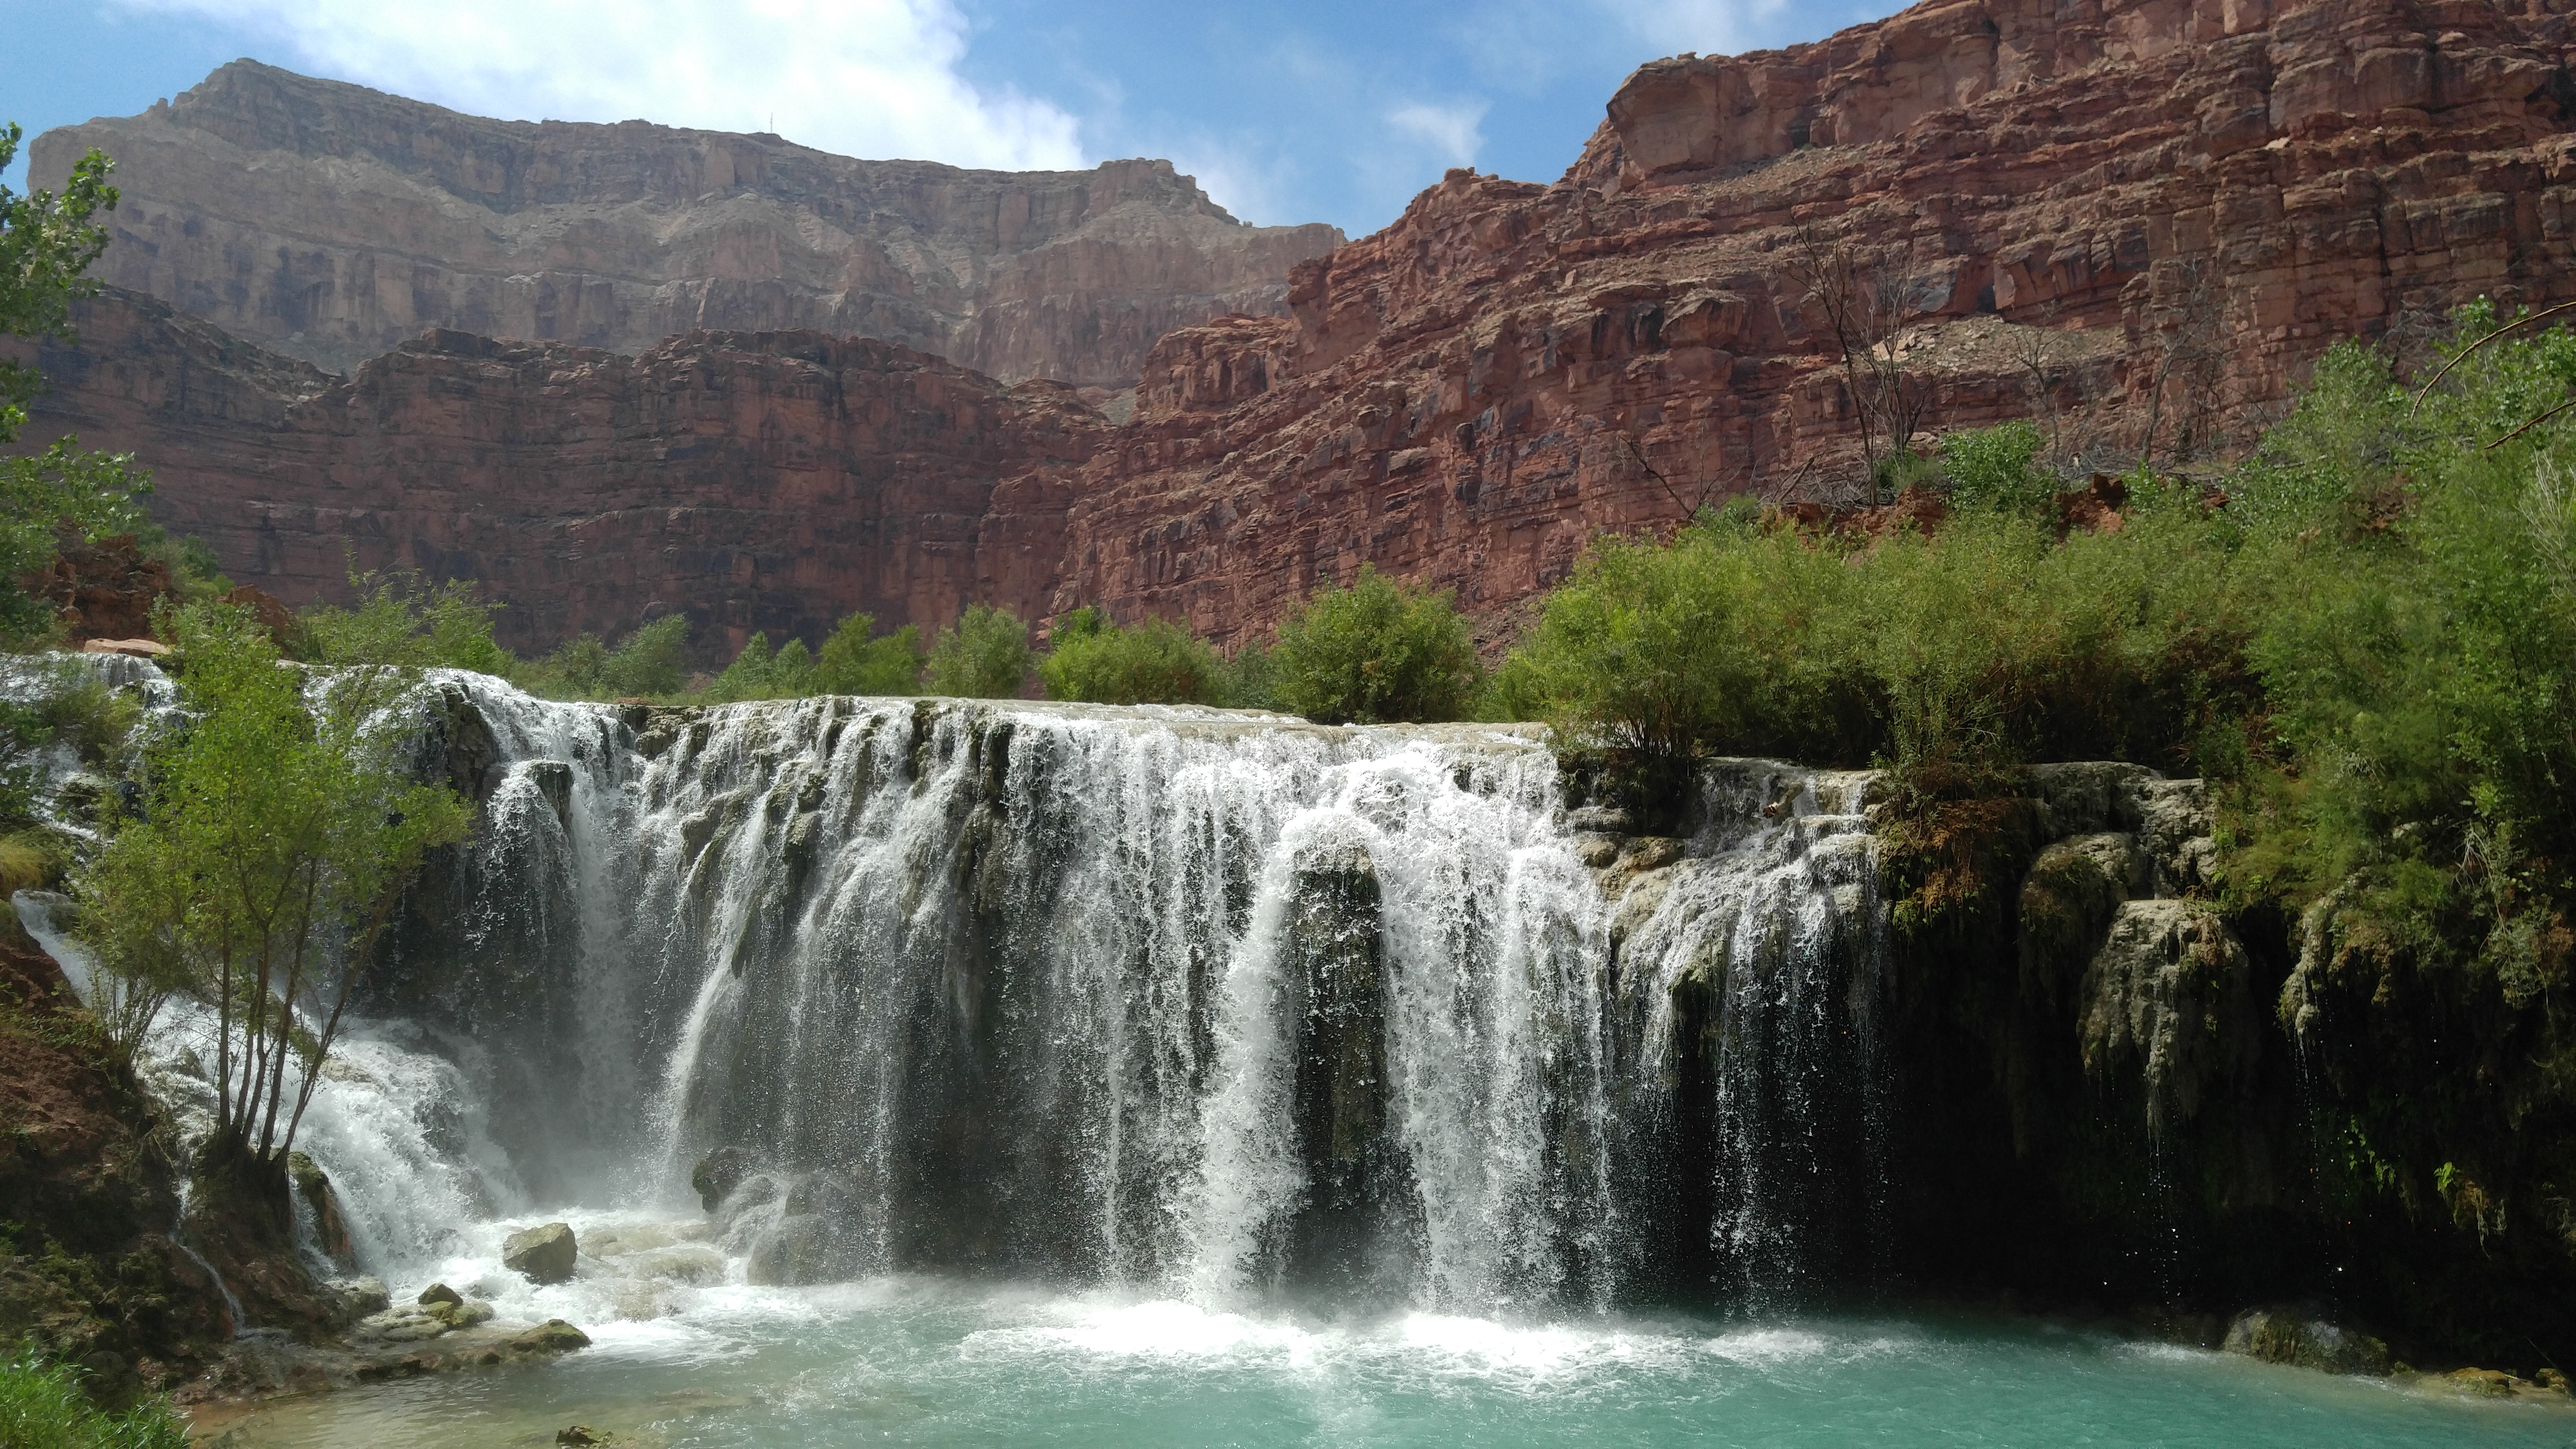  View of small falls found along Havasu Creek in the Grand Canyon 